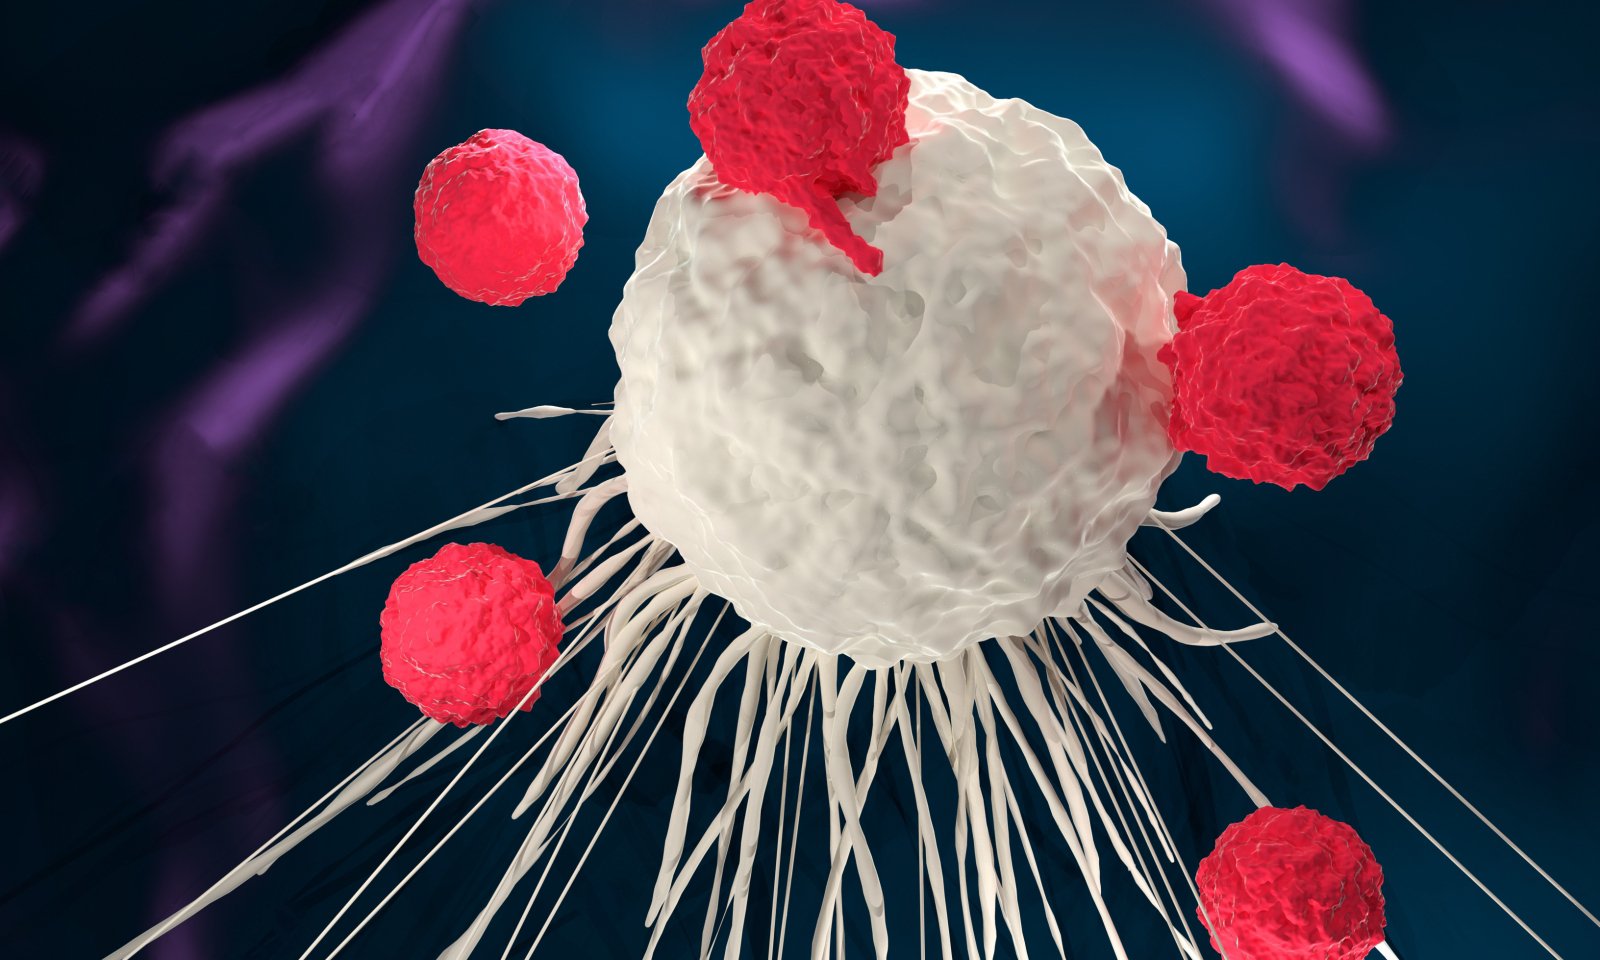 3D render of immune system T cells attacking a cancer cell